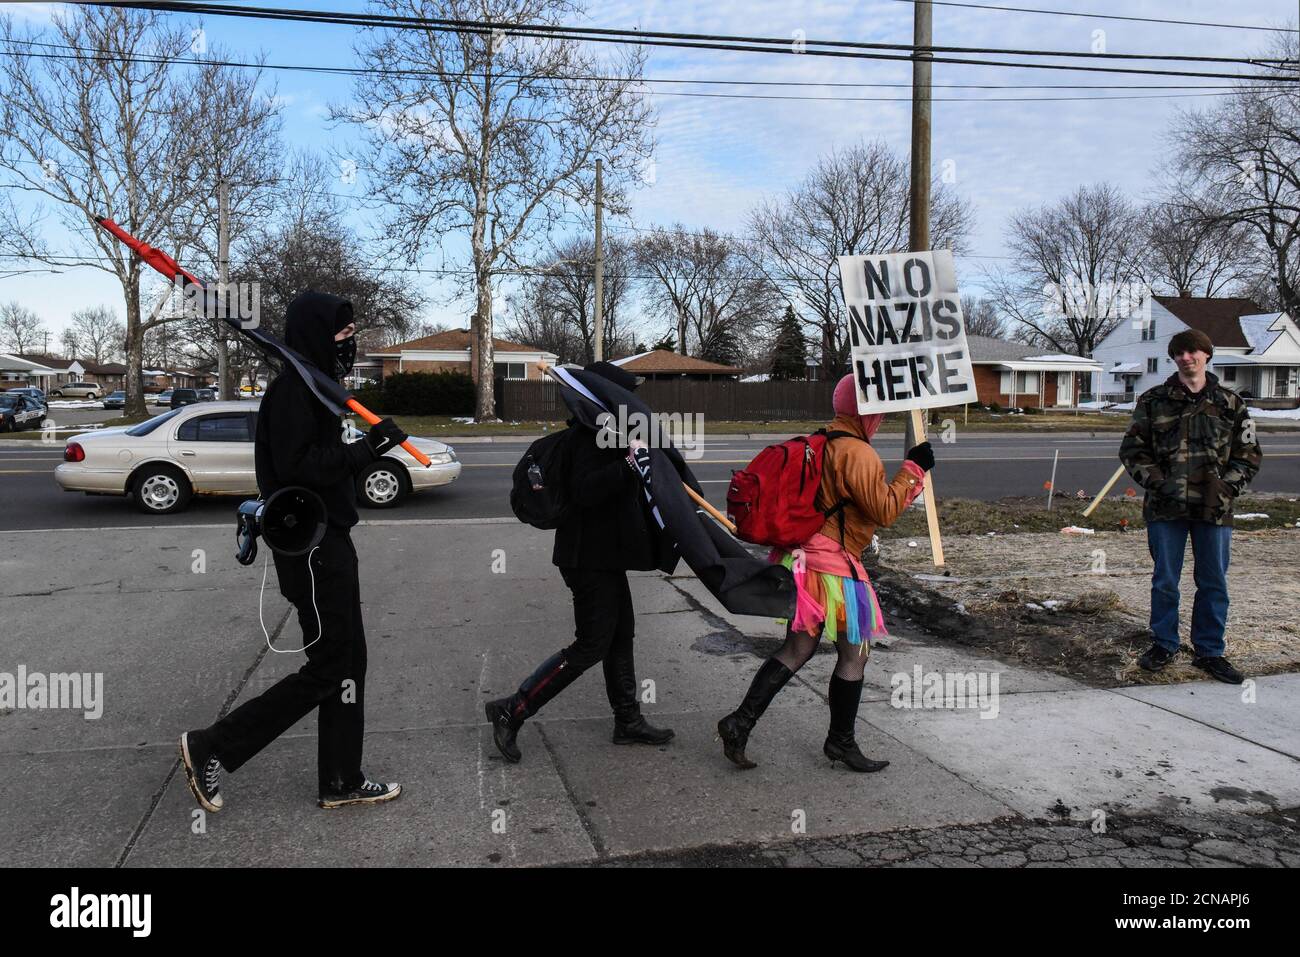 Members of the Great Lakes anti-fascist organization (Antifa) protest against the Alt-right outside a hotel in Warren, Michigan, U.S., March 4, 2018. REUTERS/Stephanie Keith Stock Photo